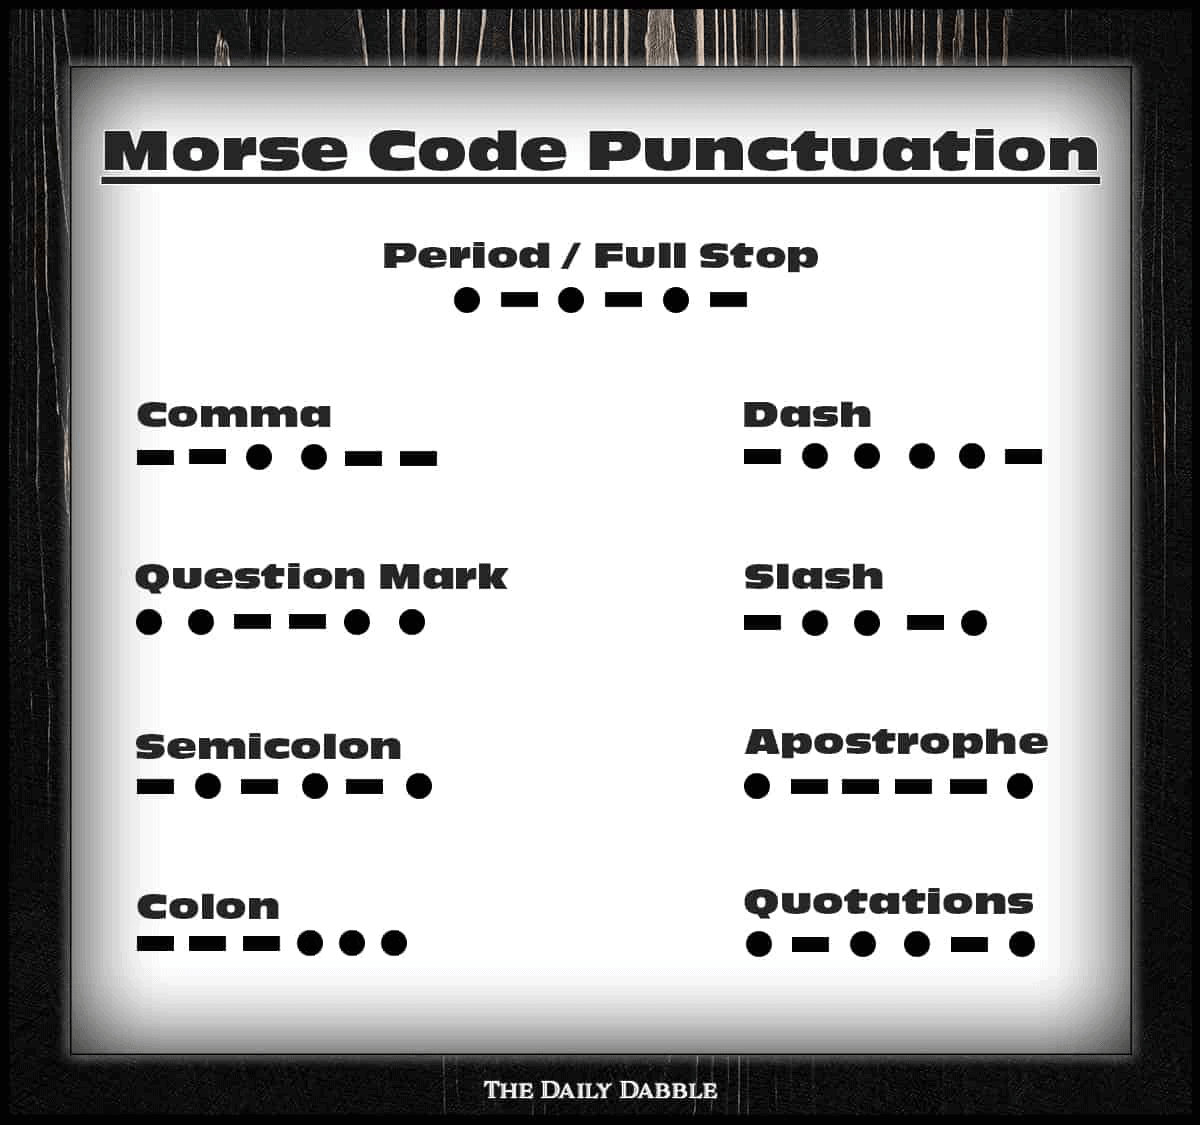 Complete chart of all Morse code punctuation